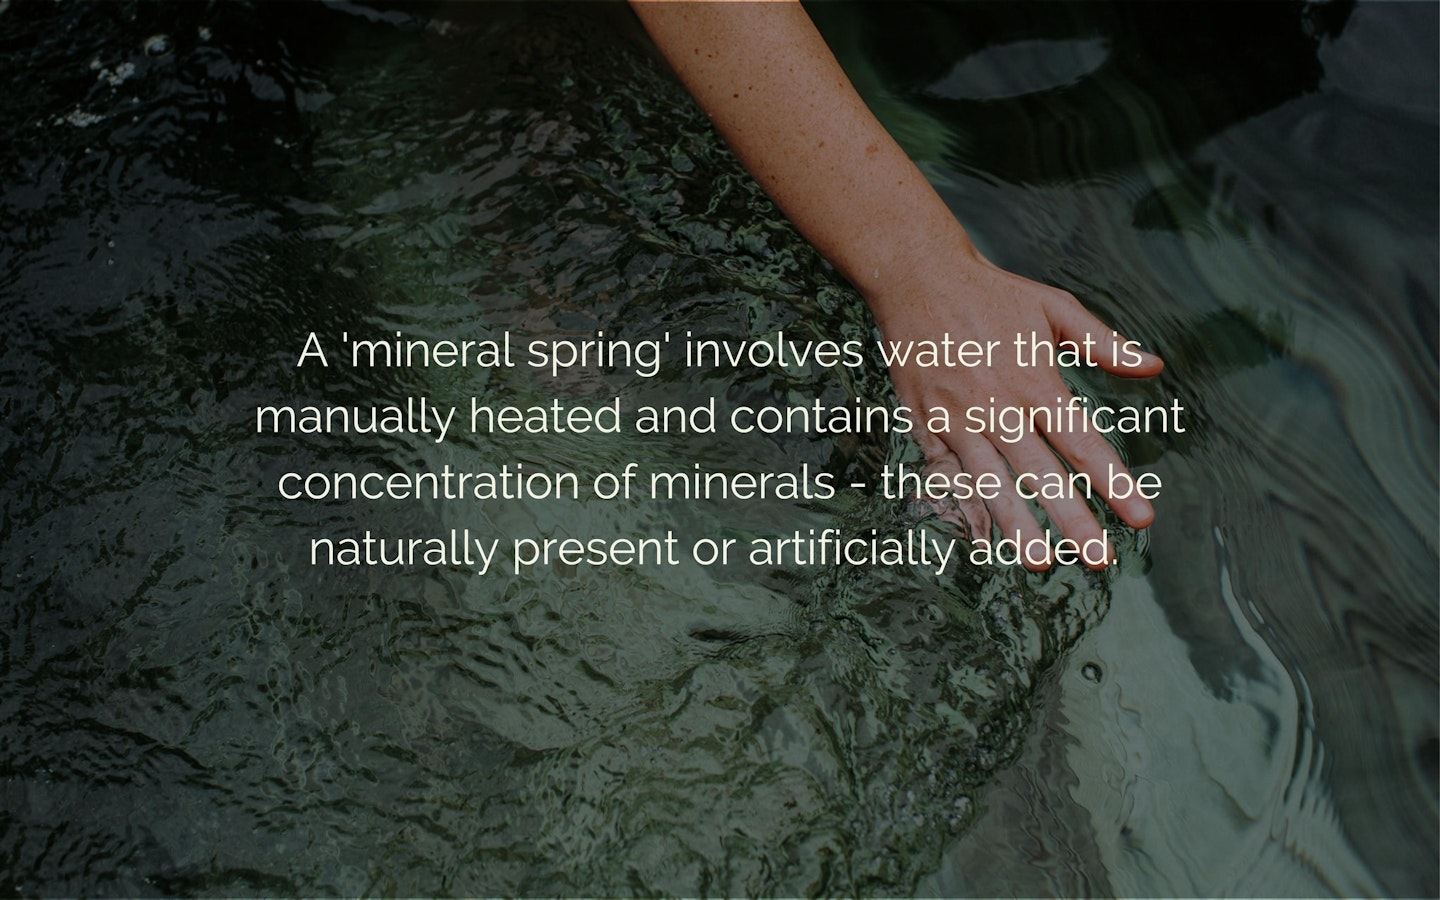 Text "A 'mineral spring' involves water that is manually heated and contains a significant concentration of minerals - these can be naturally present or artificially added" overlaying an image of water with a hand running through.